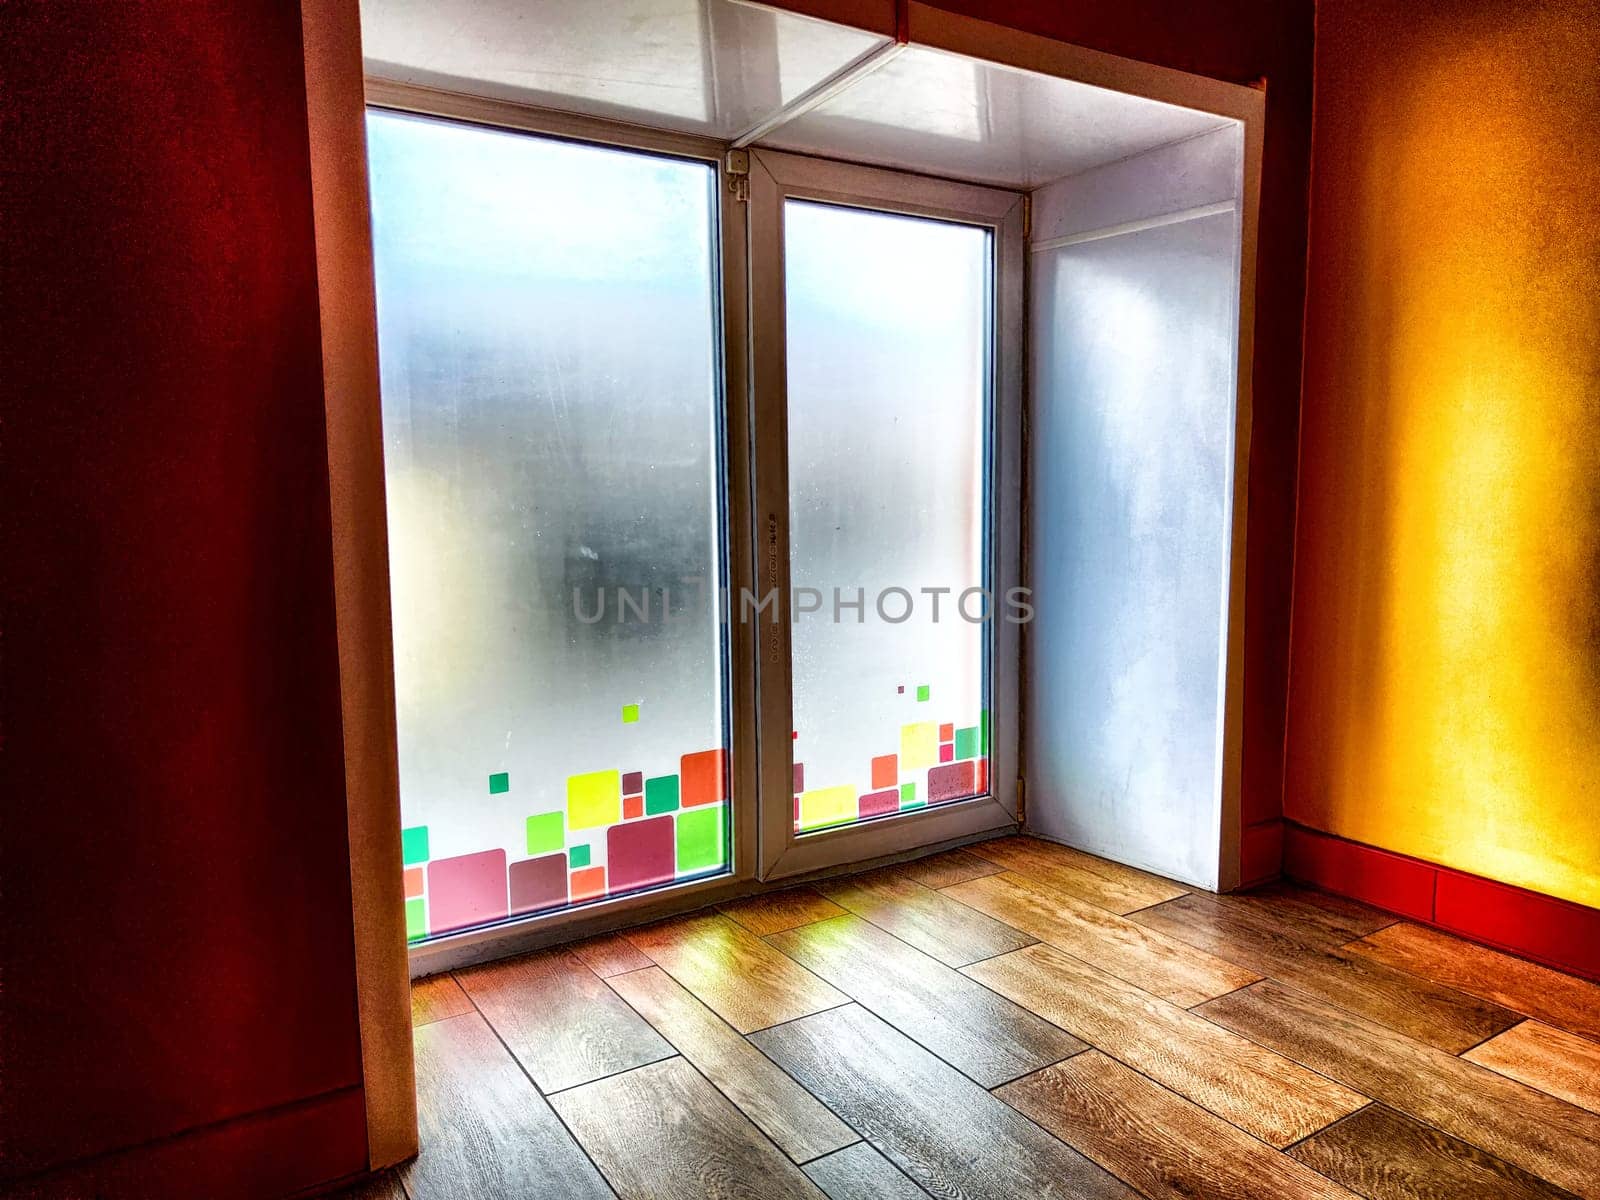 Window and floor. Background, texture. Frosted Glass Door With Colorful Square Details in a Wooden Interior by keleny